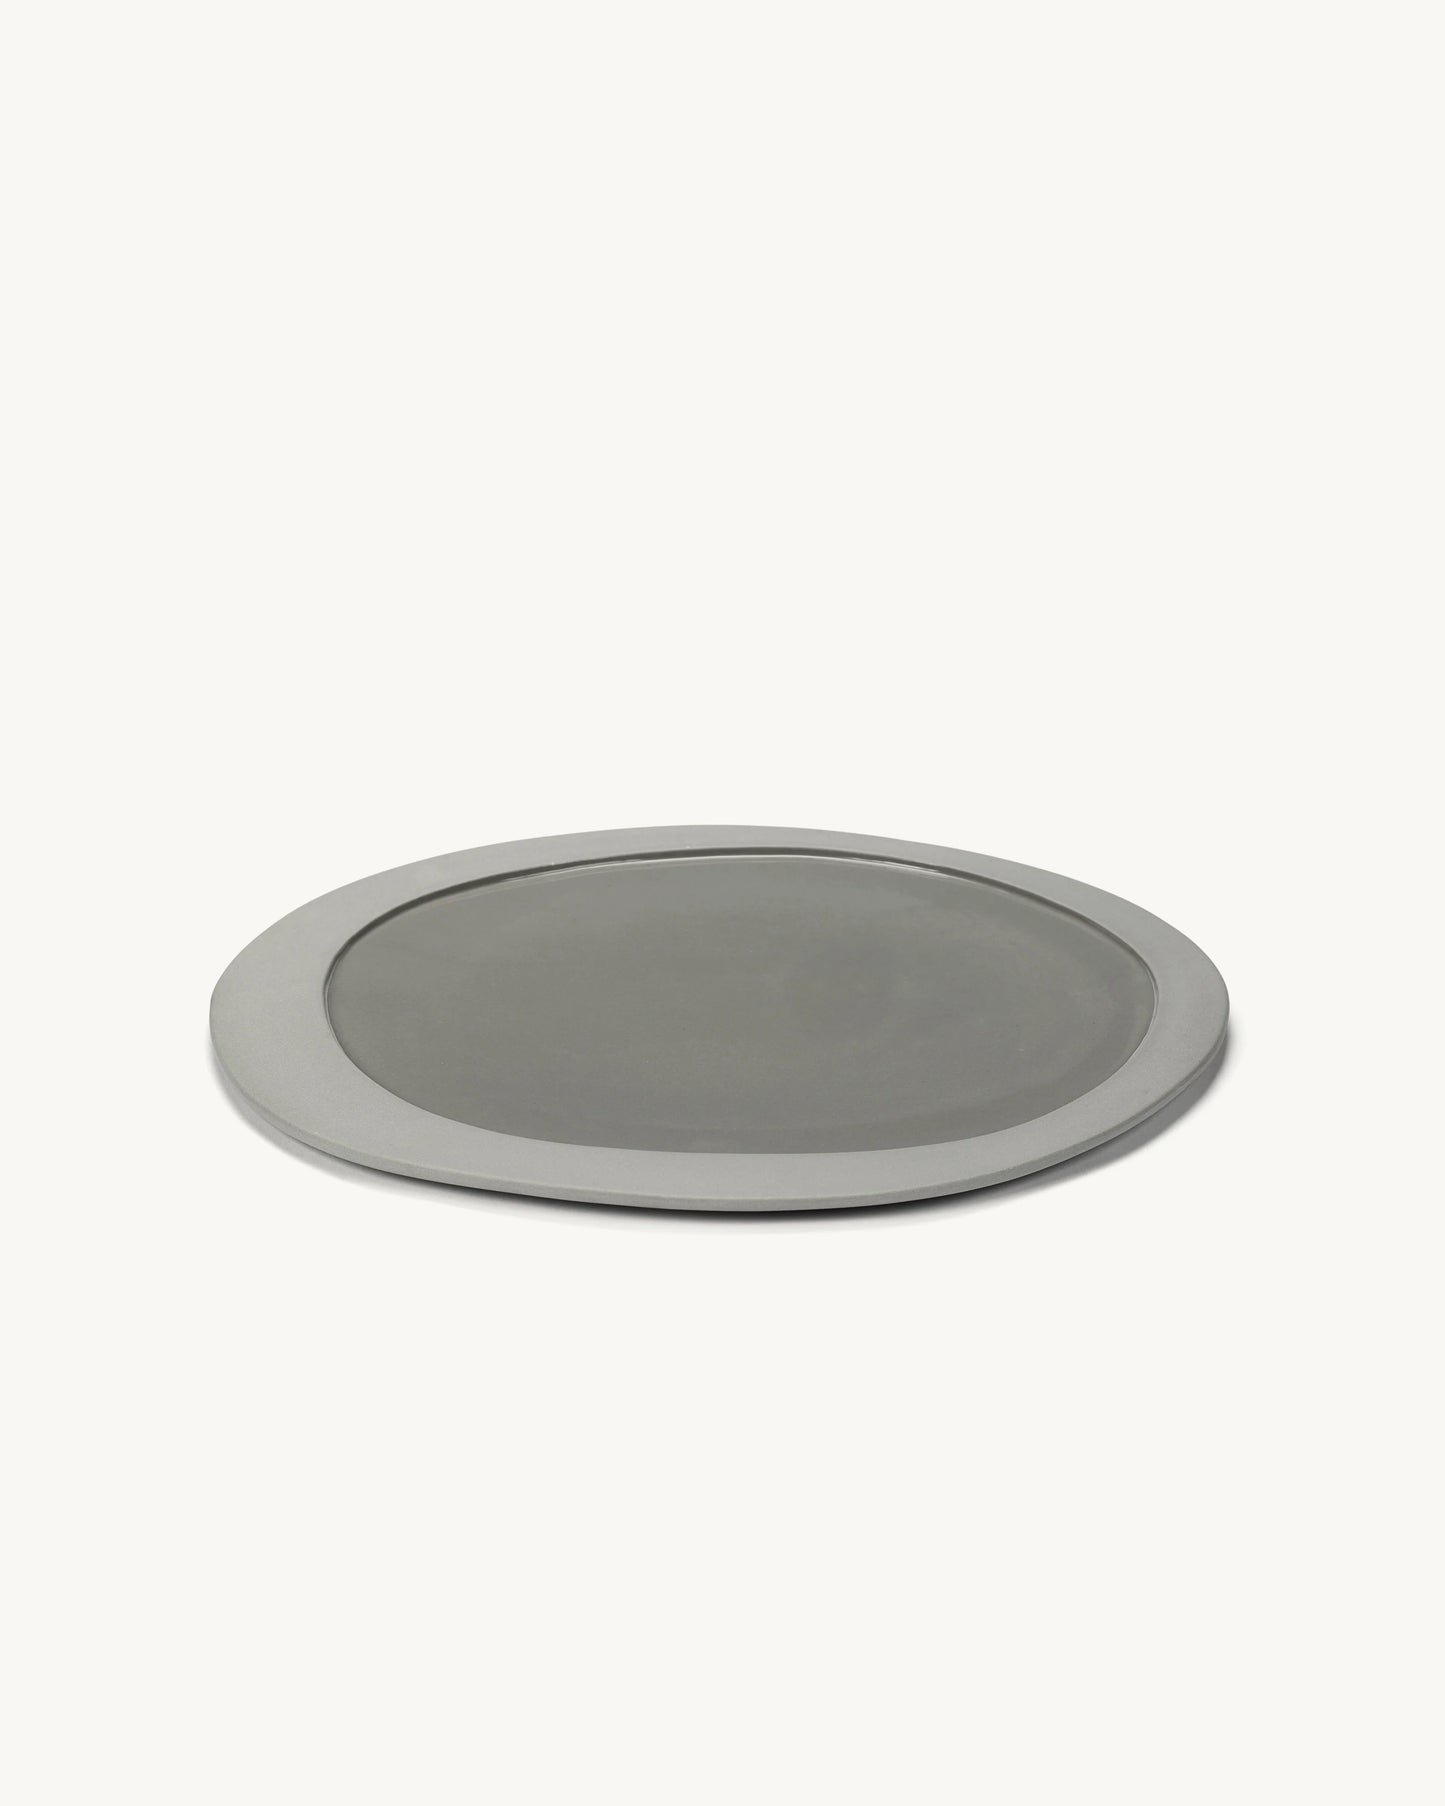 Valerie Objects Inner Circle Plate Large, light grey by Maarten Baas - $79.00